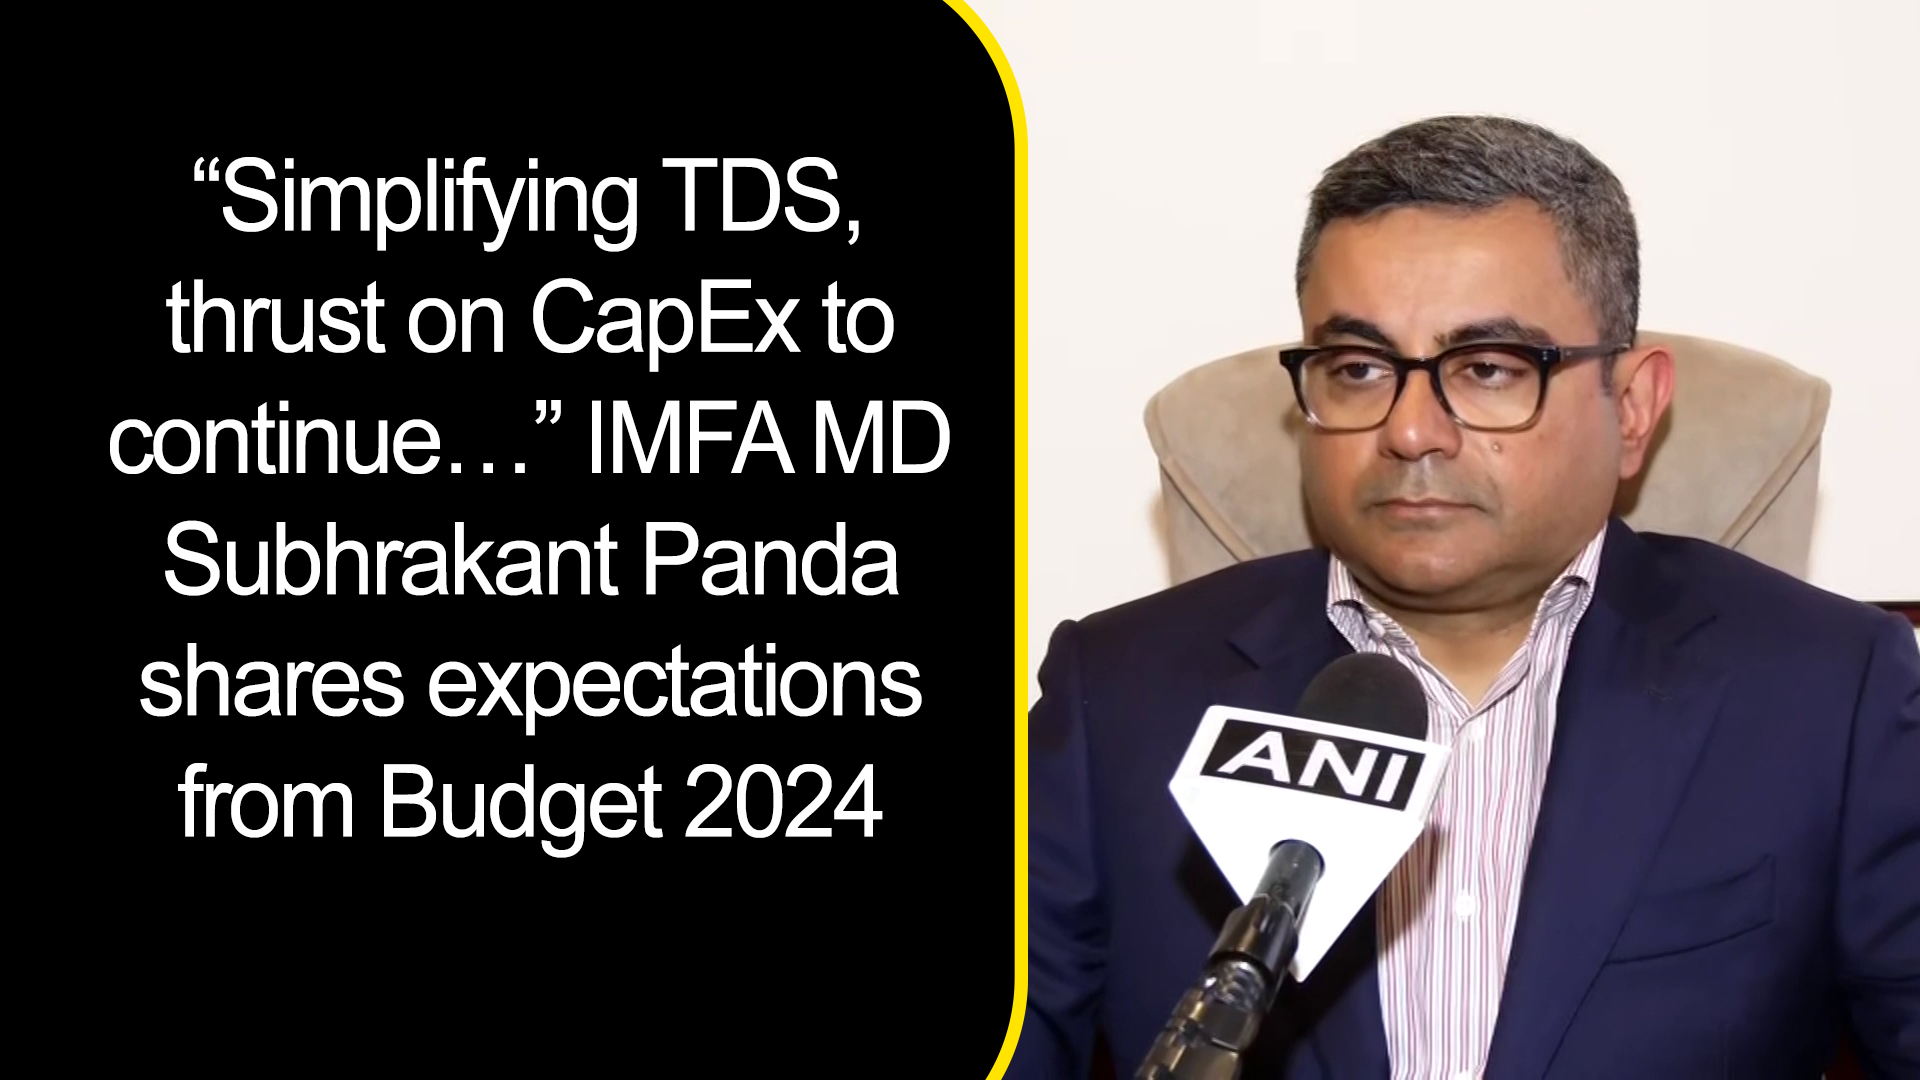 ``Simplifying TDS, thrust on CapEx to continue `` IMFA MD Subhrakant Panda shares expectations from Budget 2024